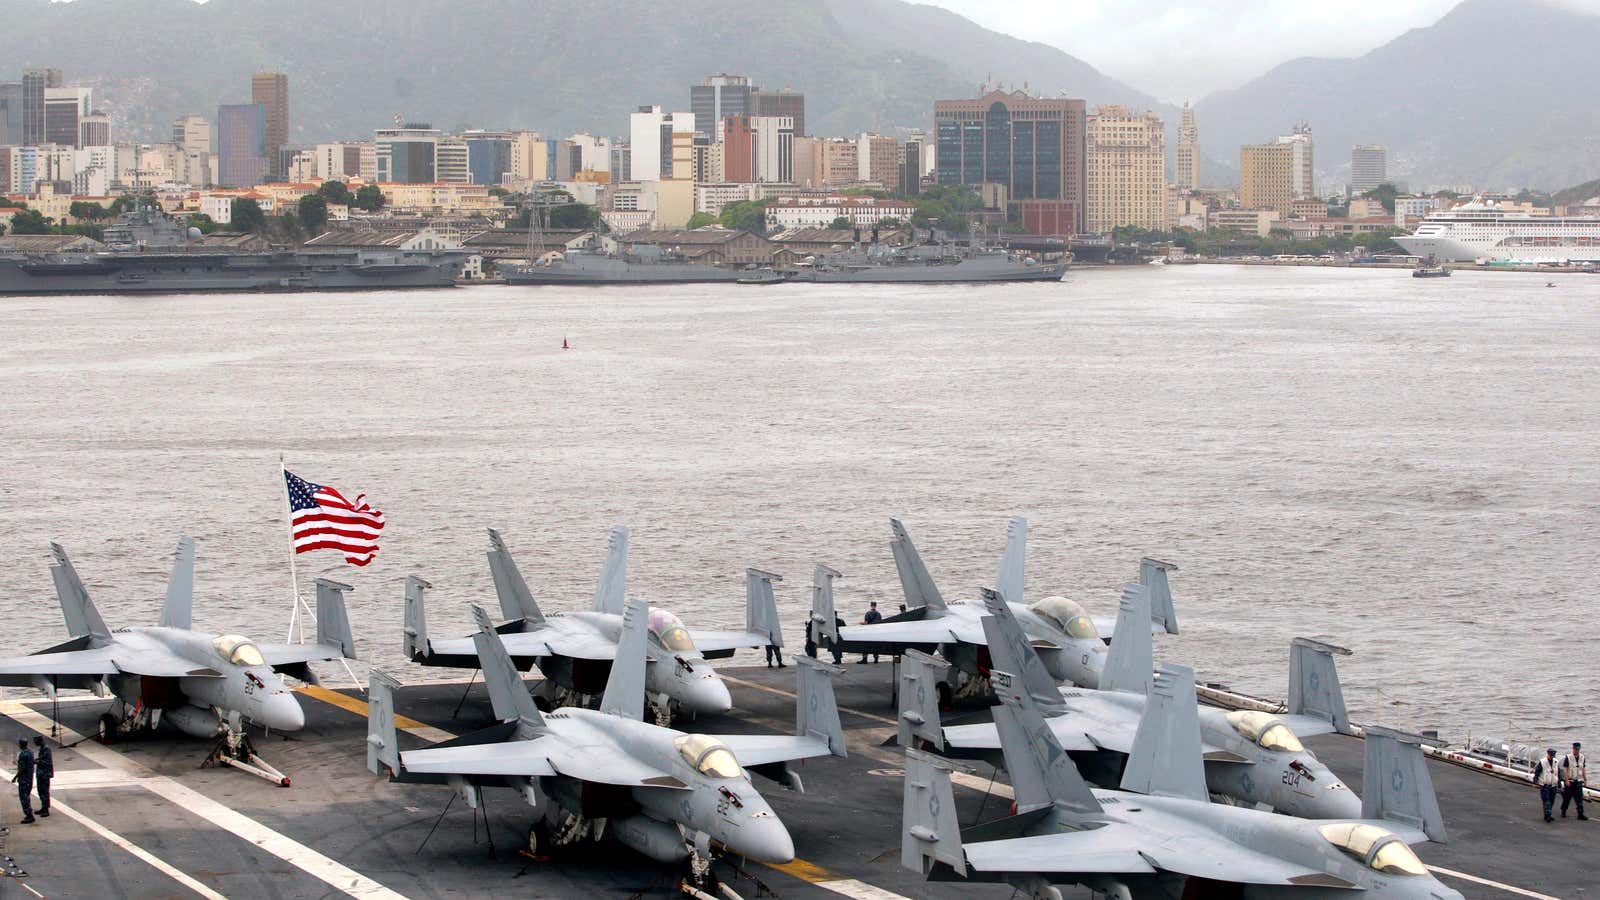 About as close to Rio as the F-18 Super Hornet is getting anytime soon.